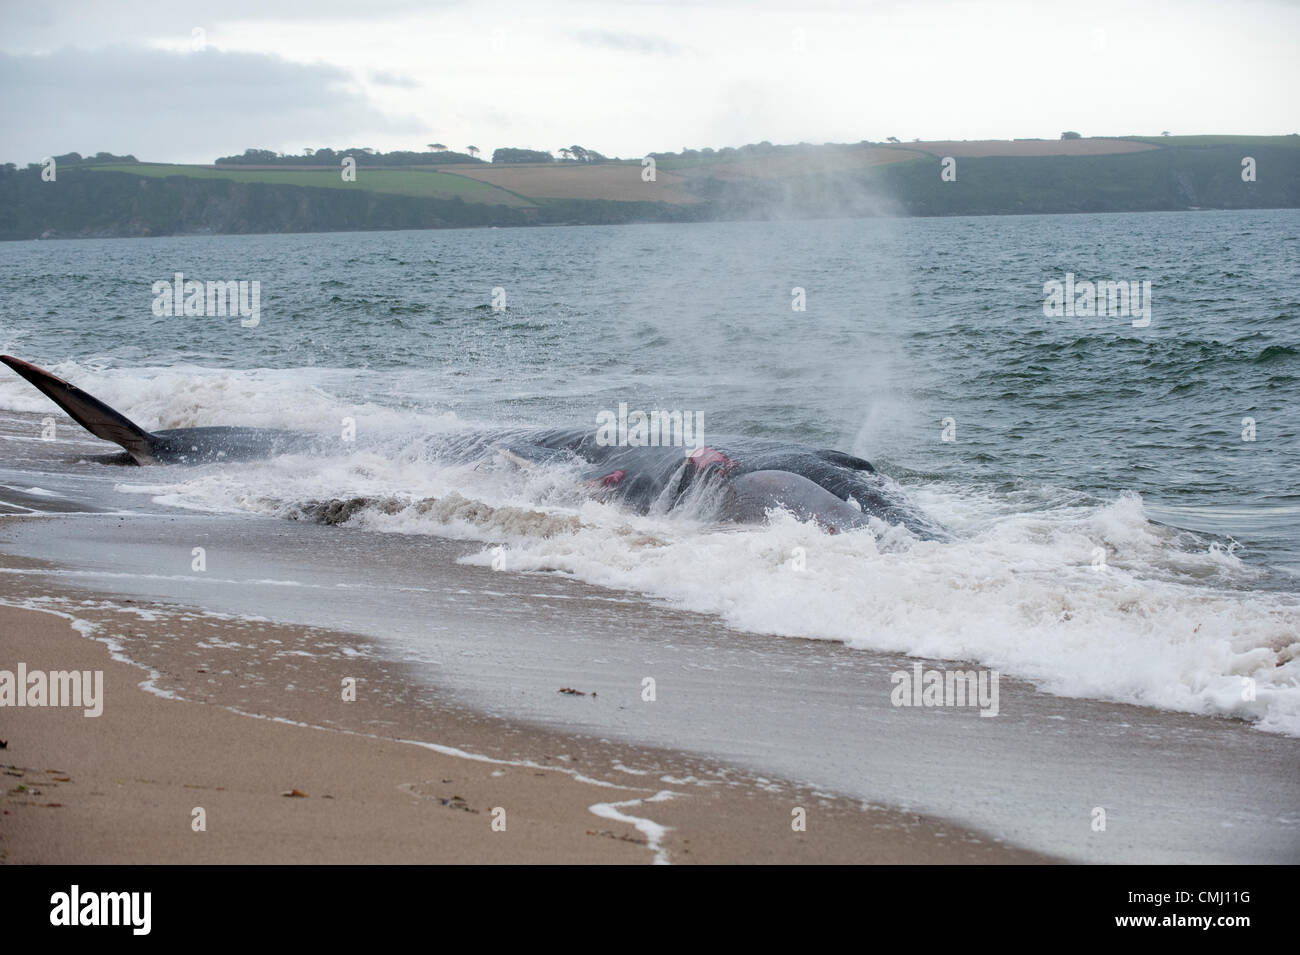 St Austell, Cornwall, UK. 13th August 2012. A fin whale lies beached on Carlyon Bay Beach near St Austell, Cornwall. The whale had earlier been spotted in St Austell Bay. According to reports, experts said the animal would have to be put down. Stock Photo